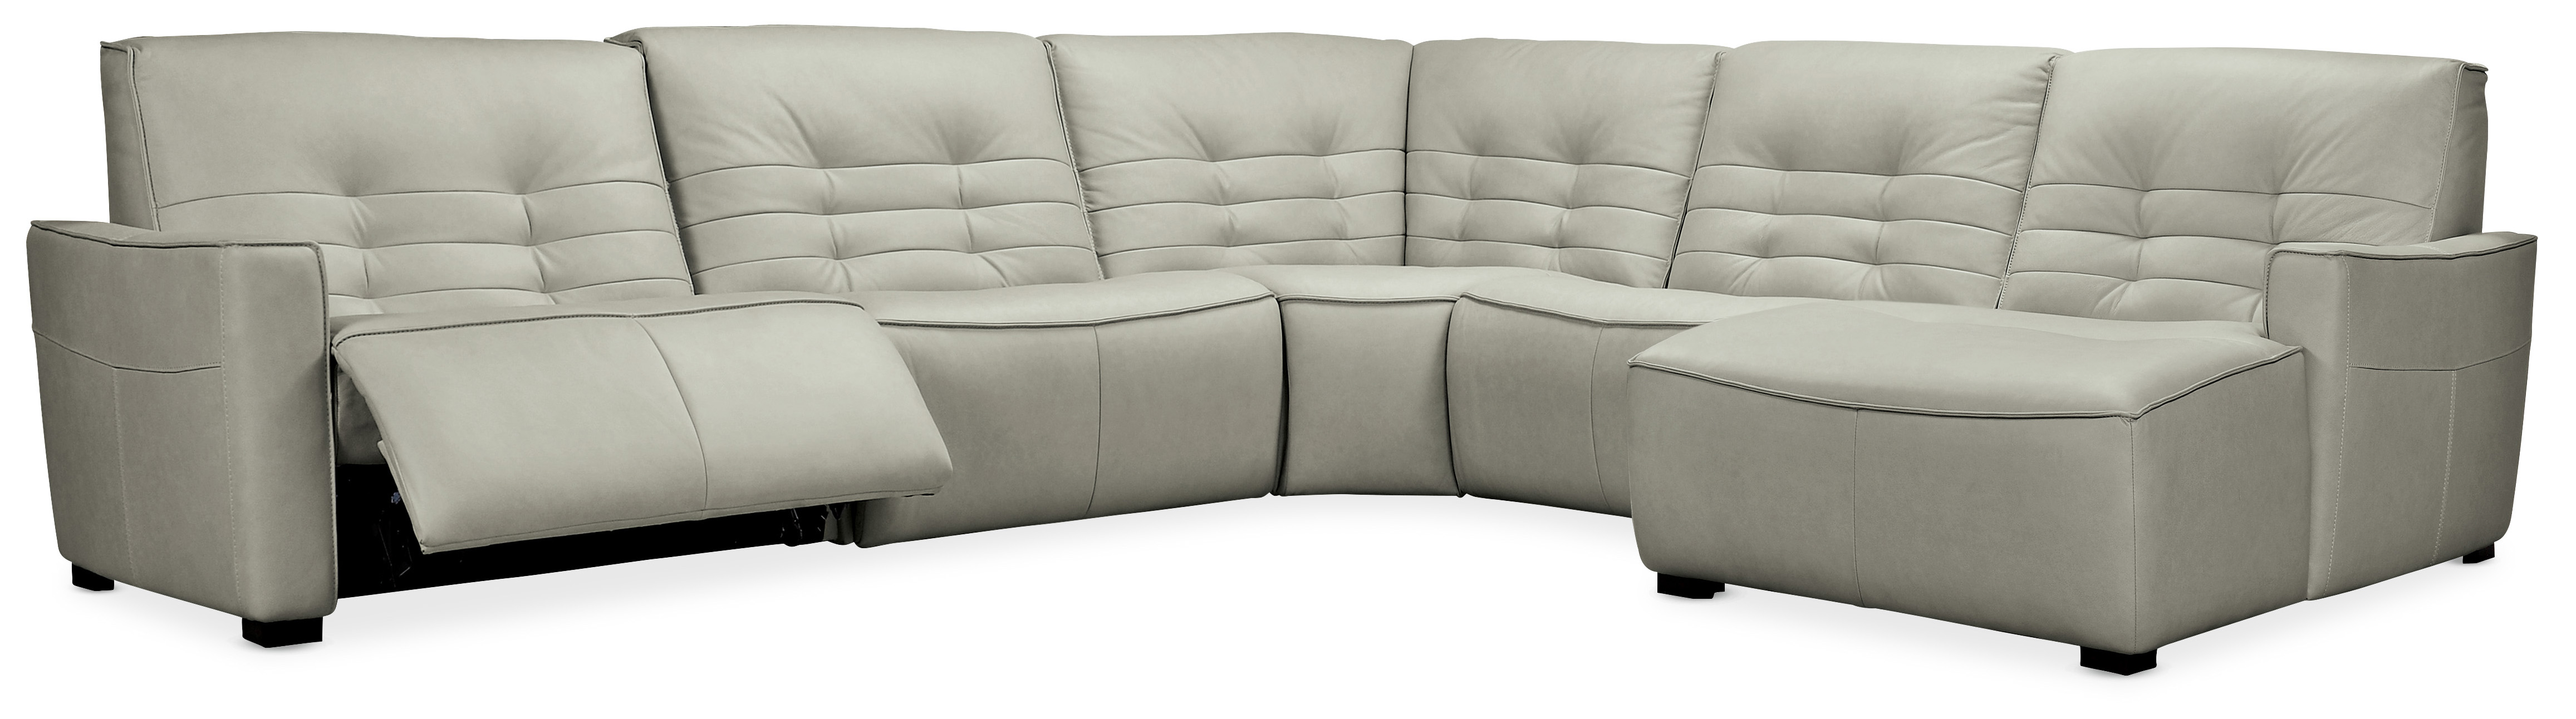 Picture of Reaux 5-Piece RAF Chaise Sectional